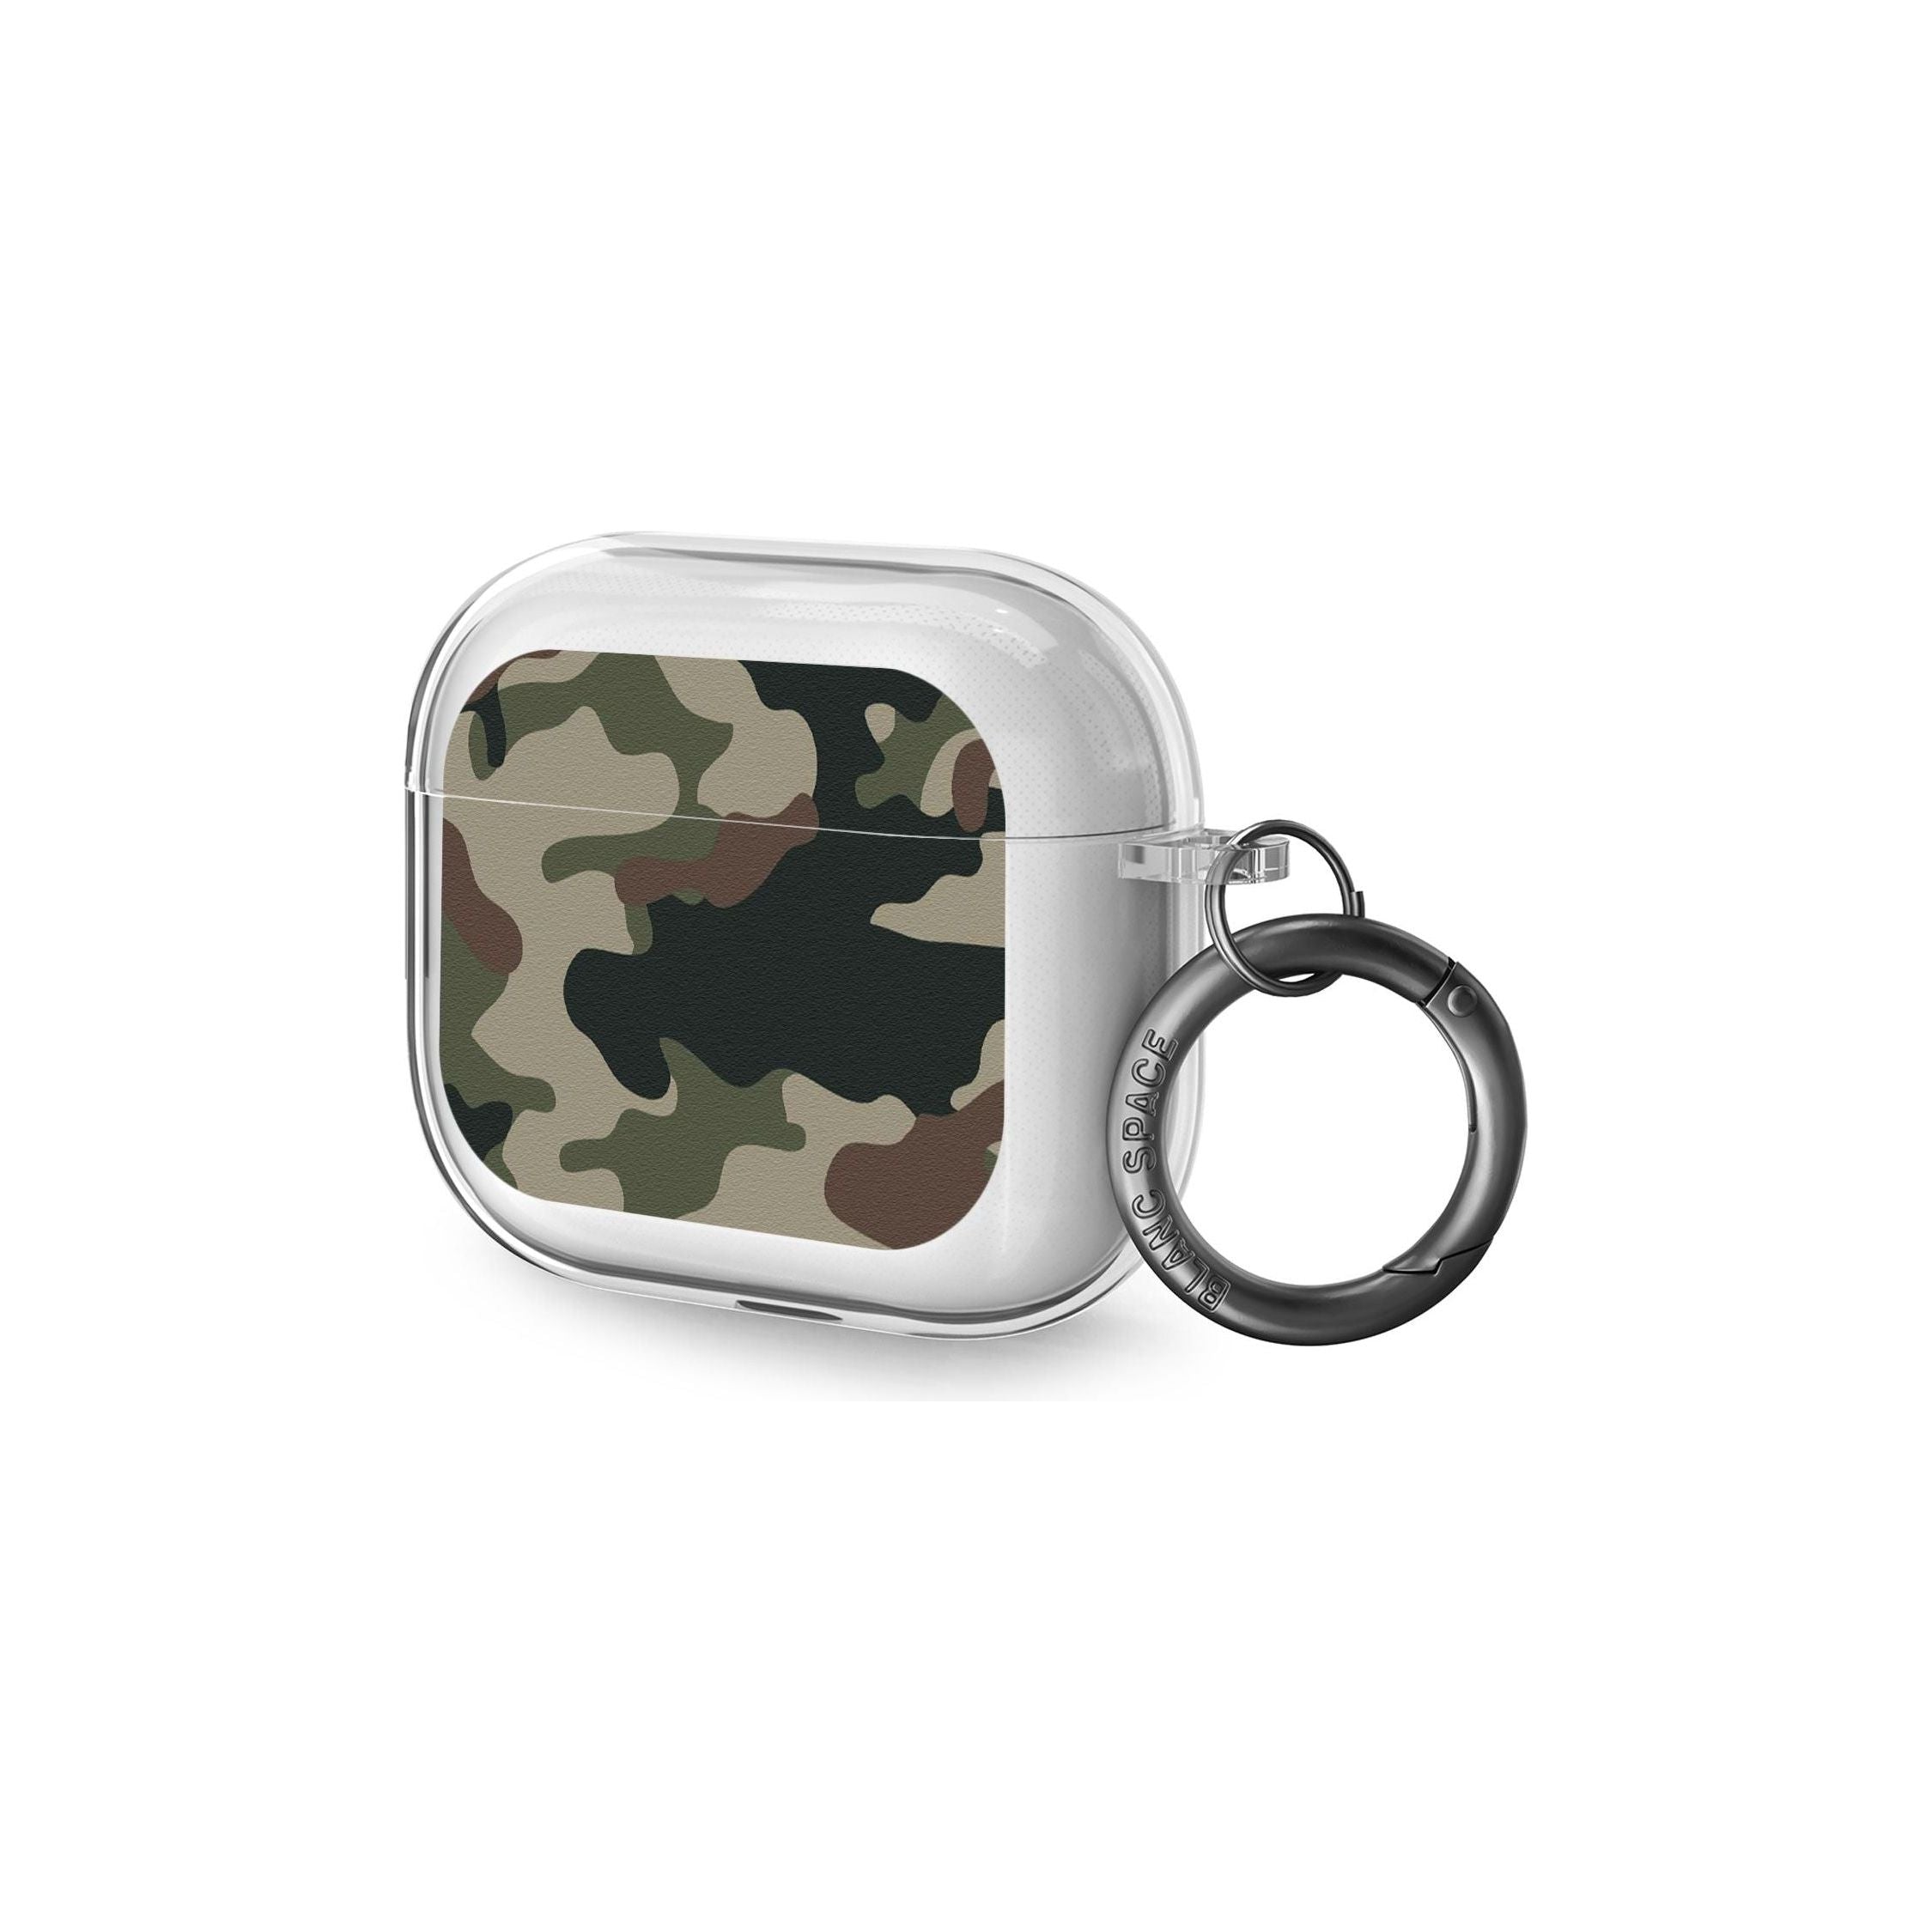 Green and Brown Camo AirPods Case (3rd Generation)